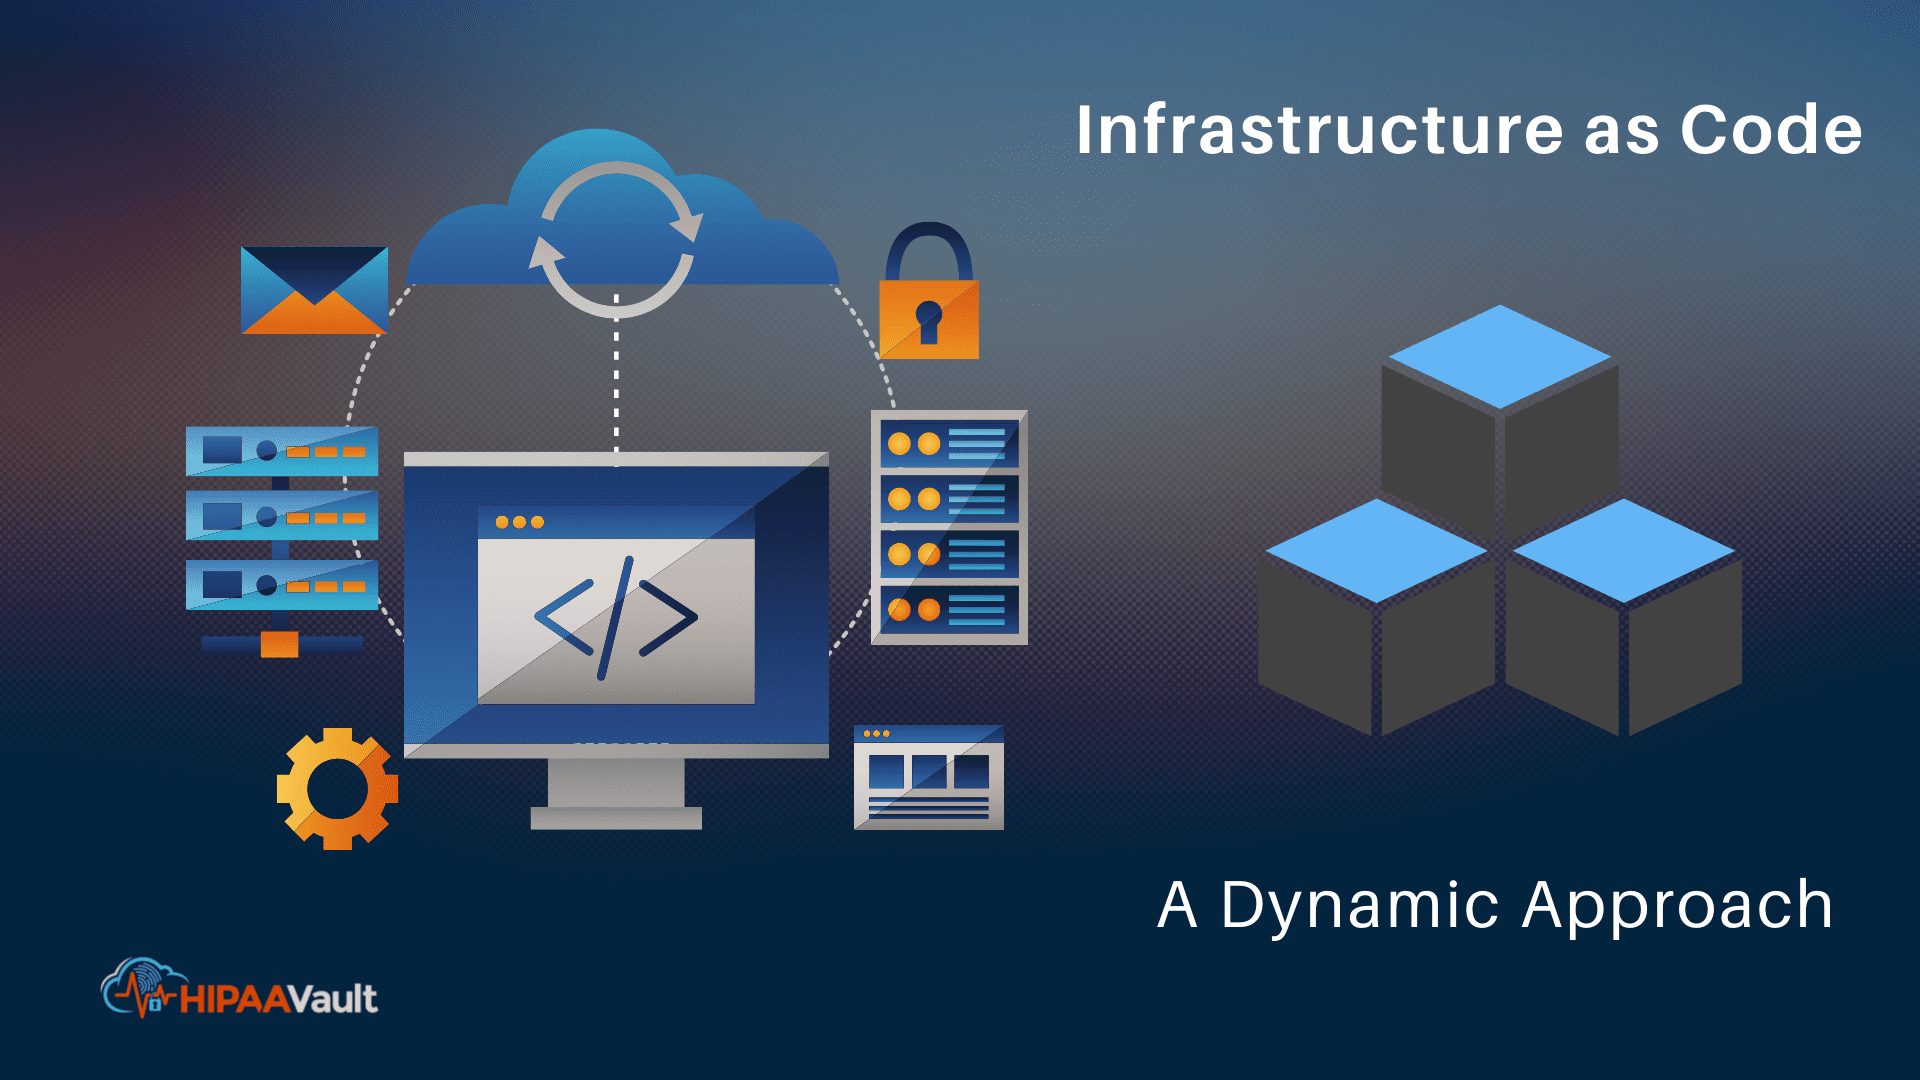 Infrastructure as Code: A Dynamic Approach